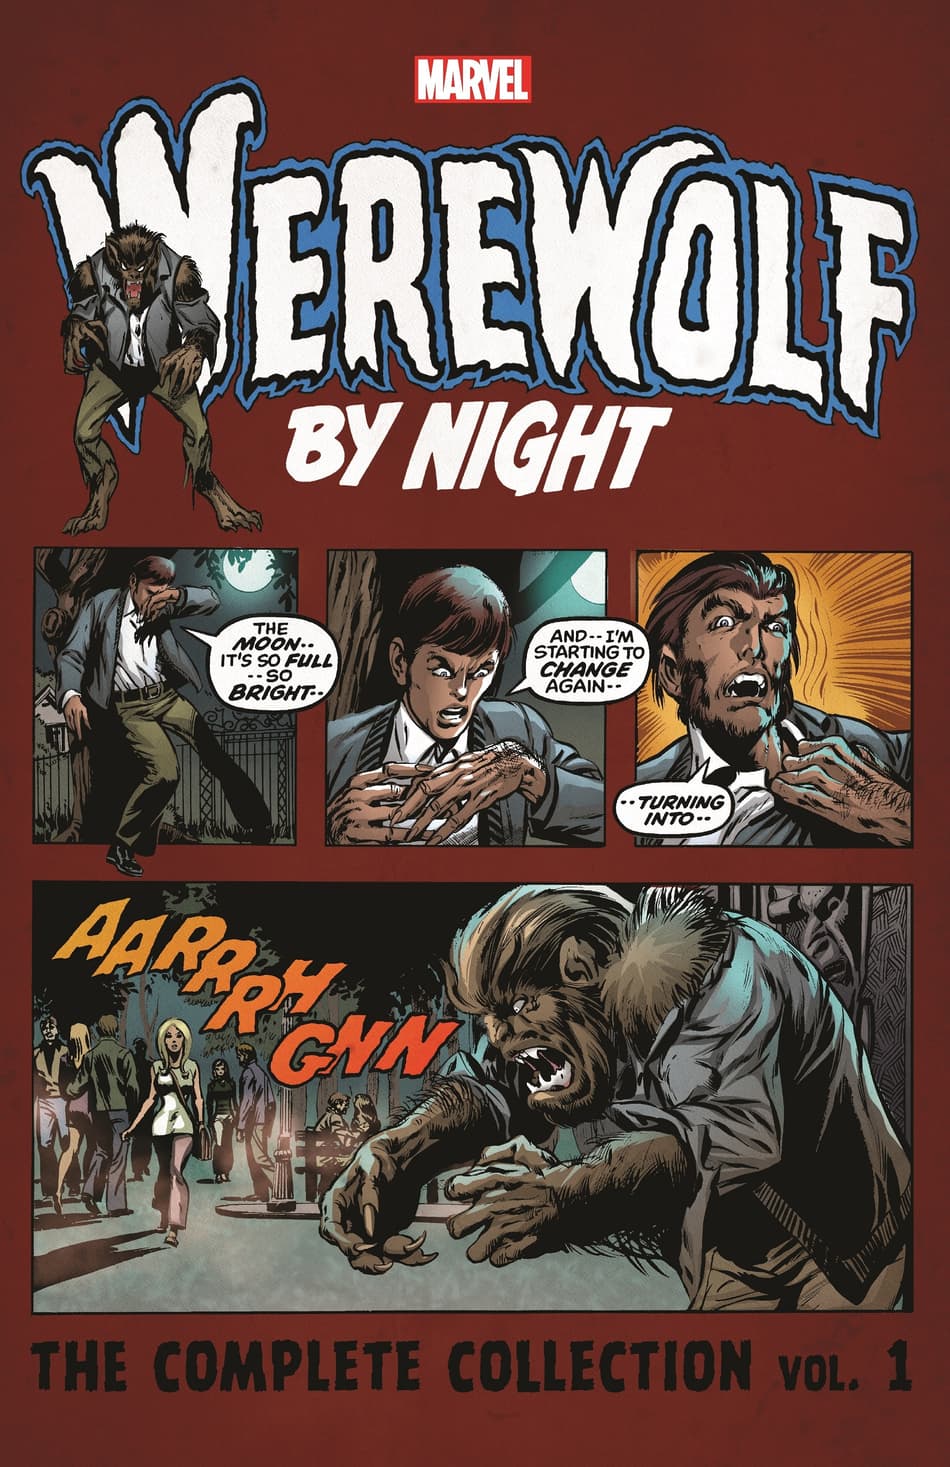 cover to WEREWOLF BY NIGHT: THE COMPLETE COLLECTION VOL. 1.